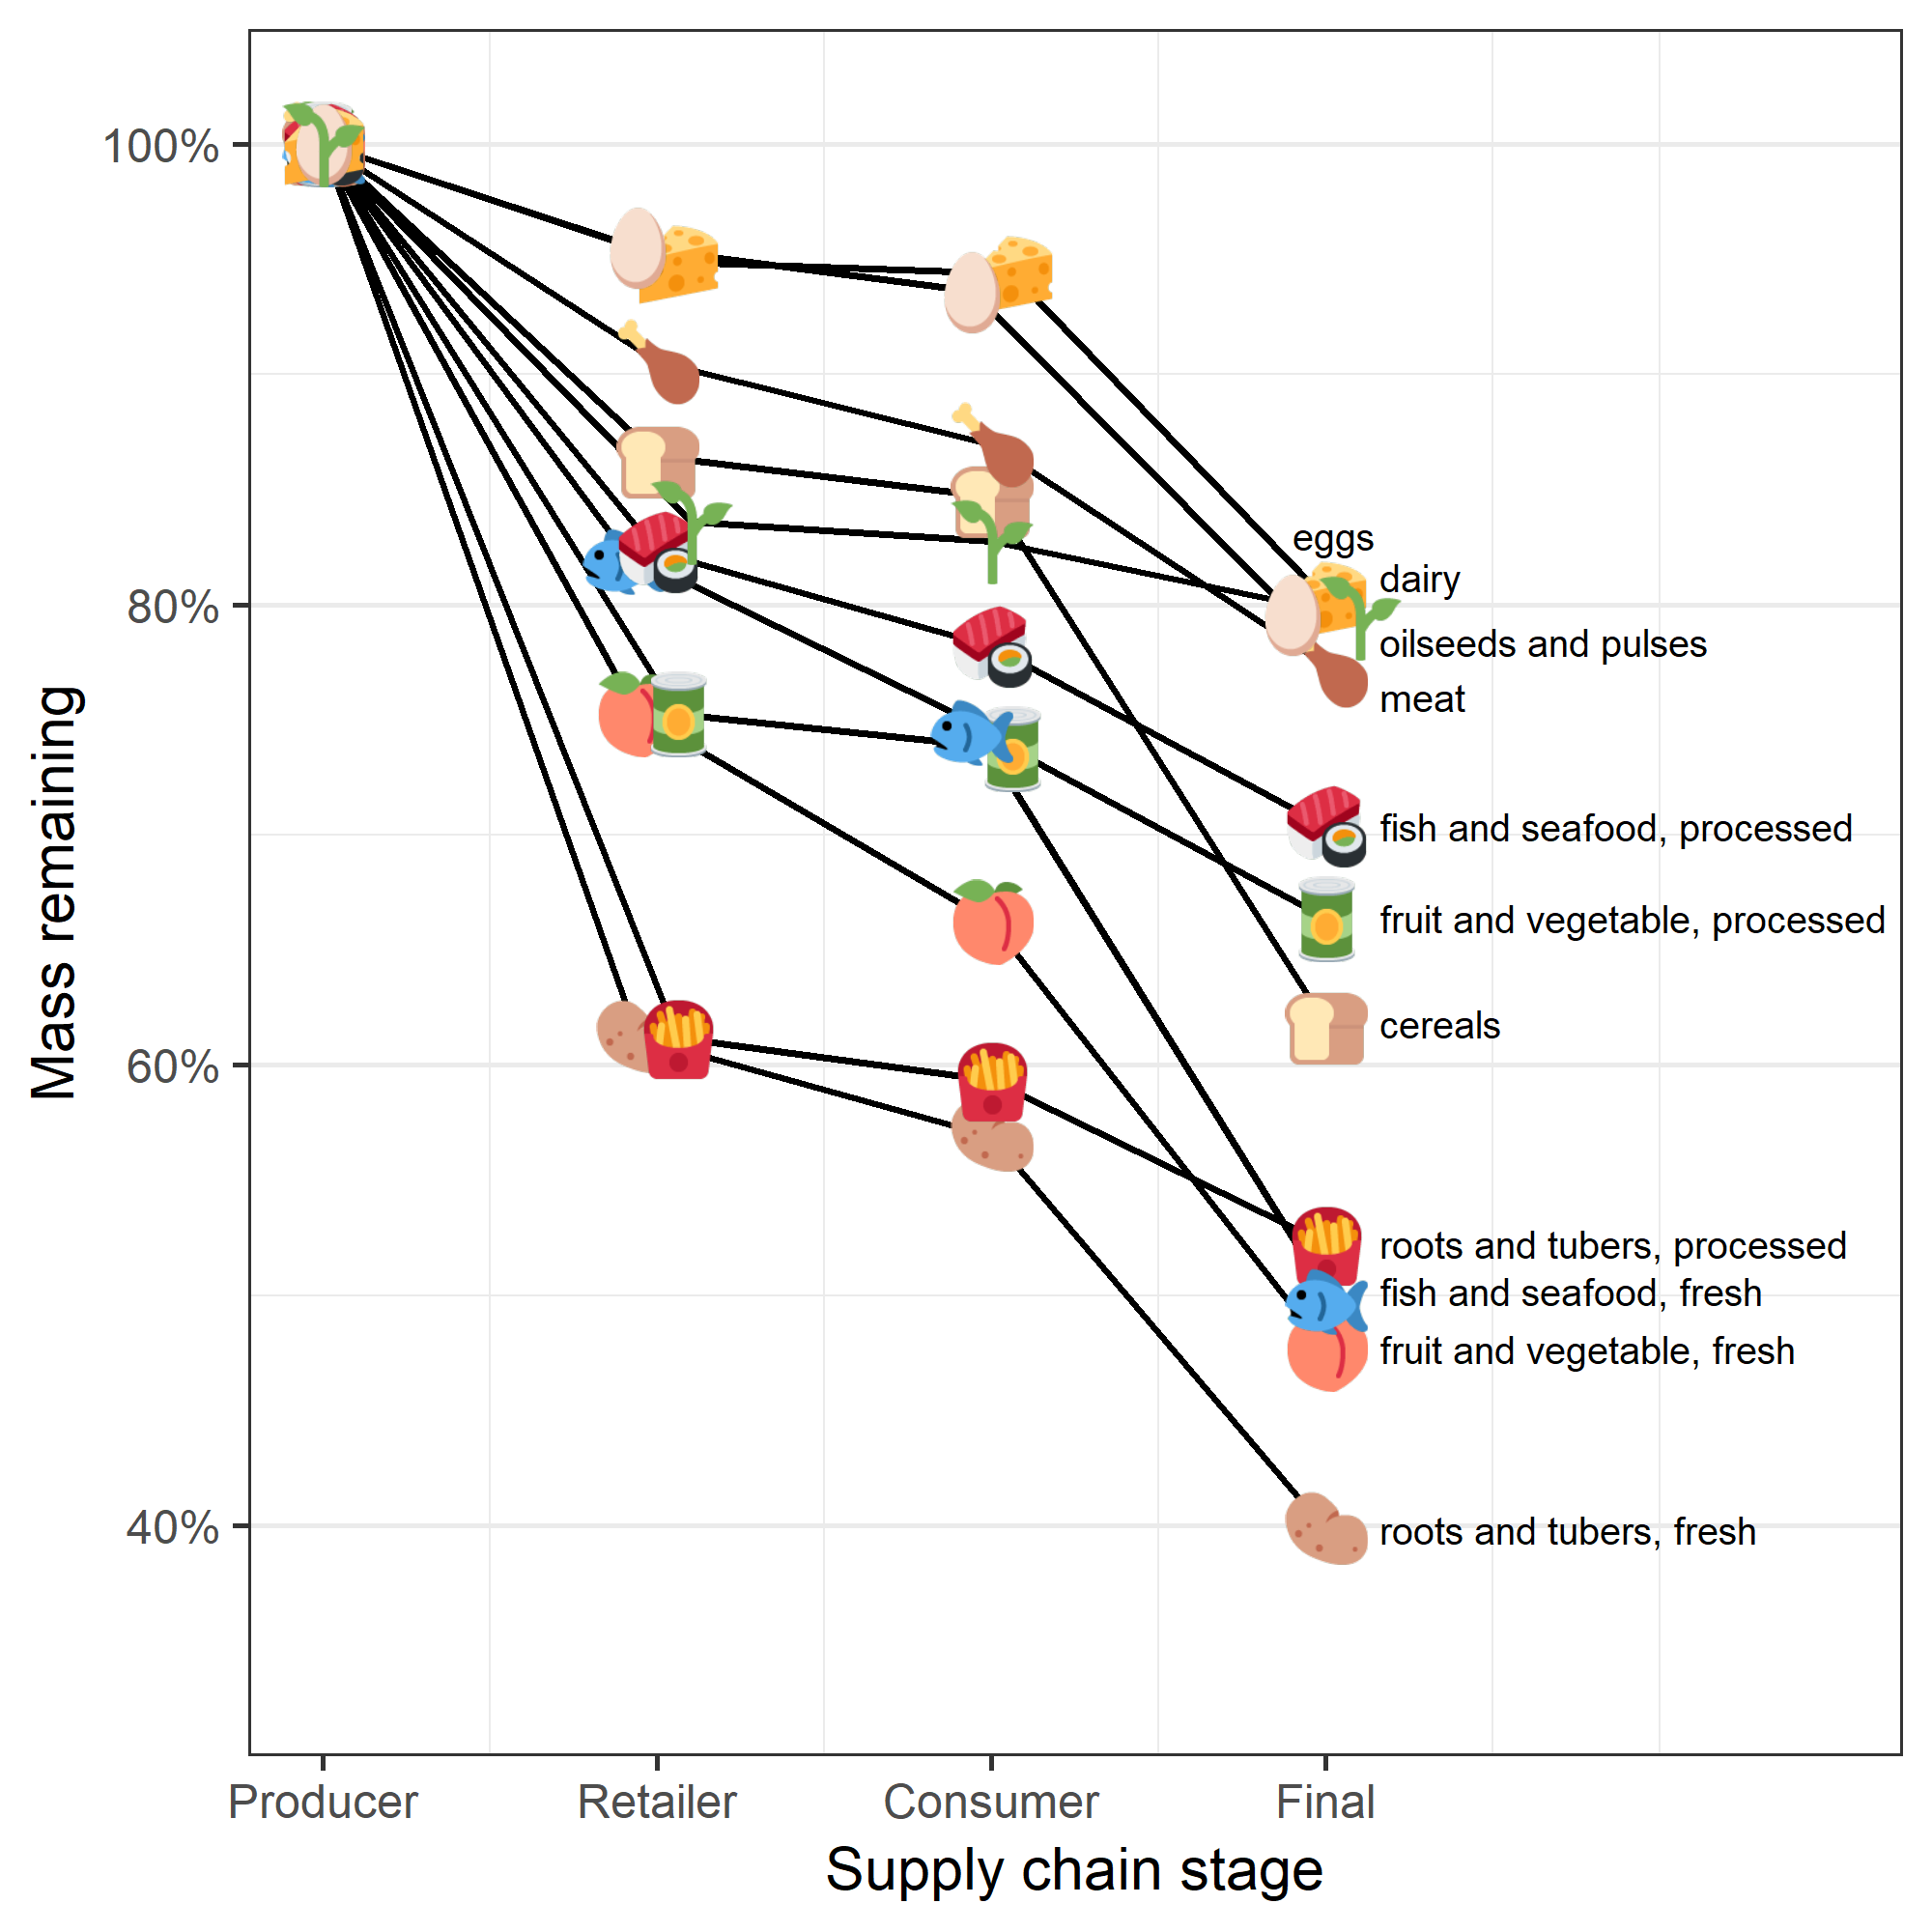 Food waste by food type and stage